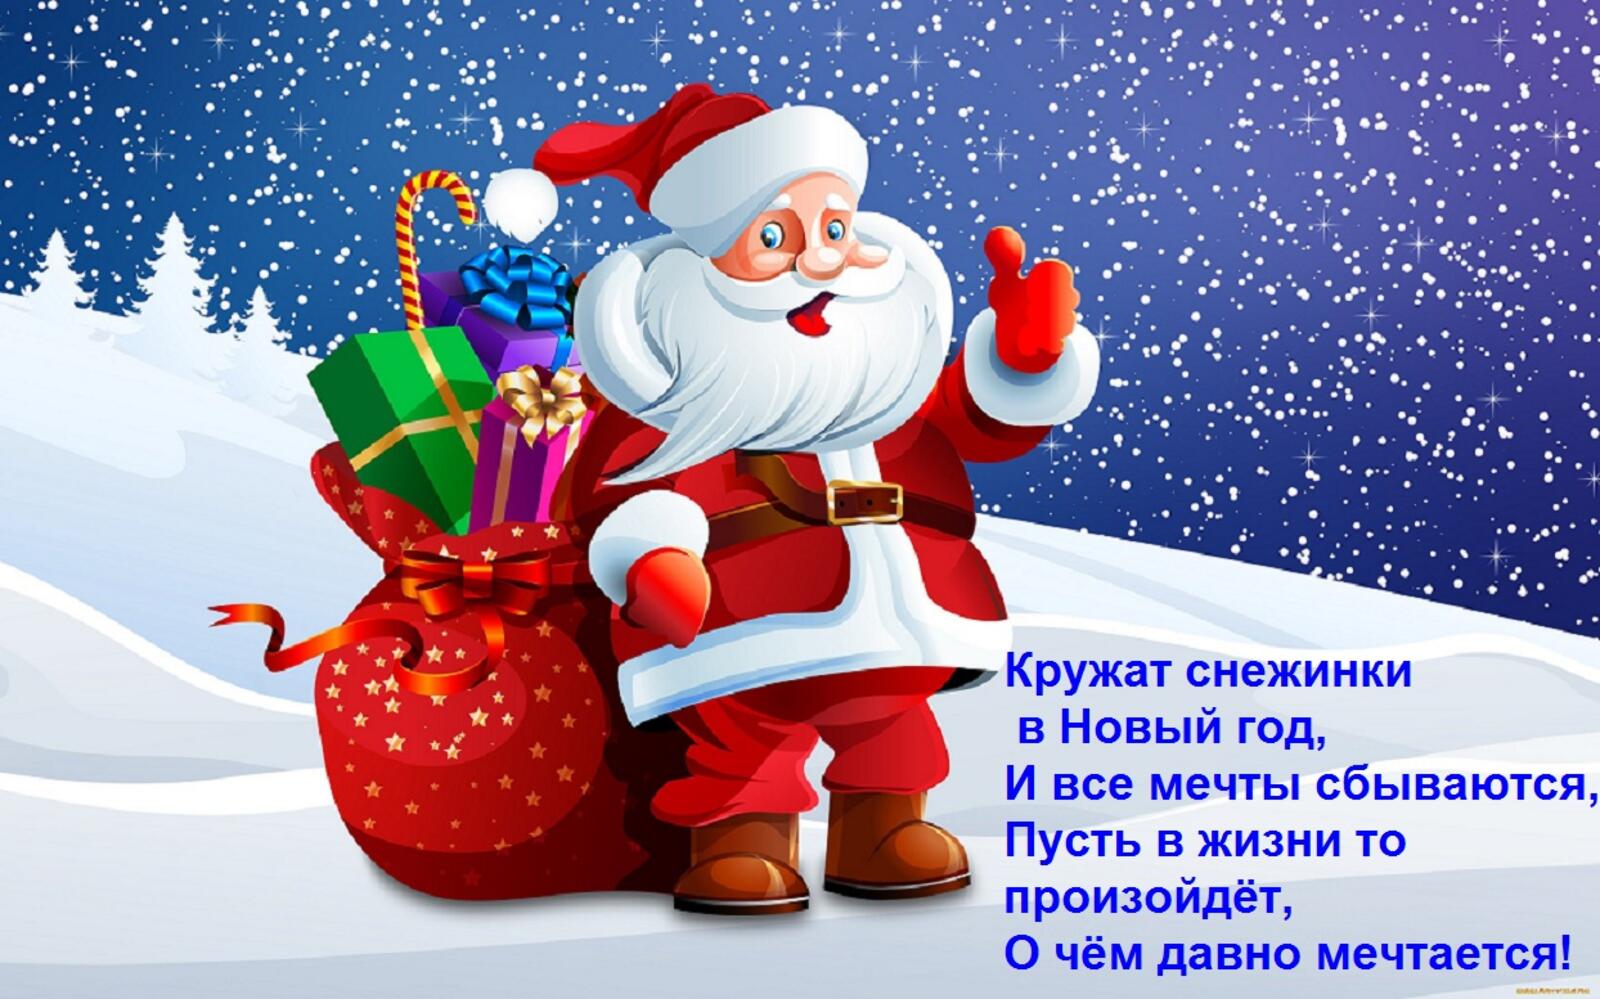 grandfather frost congratulation gifts